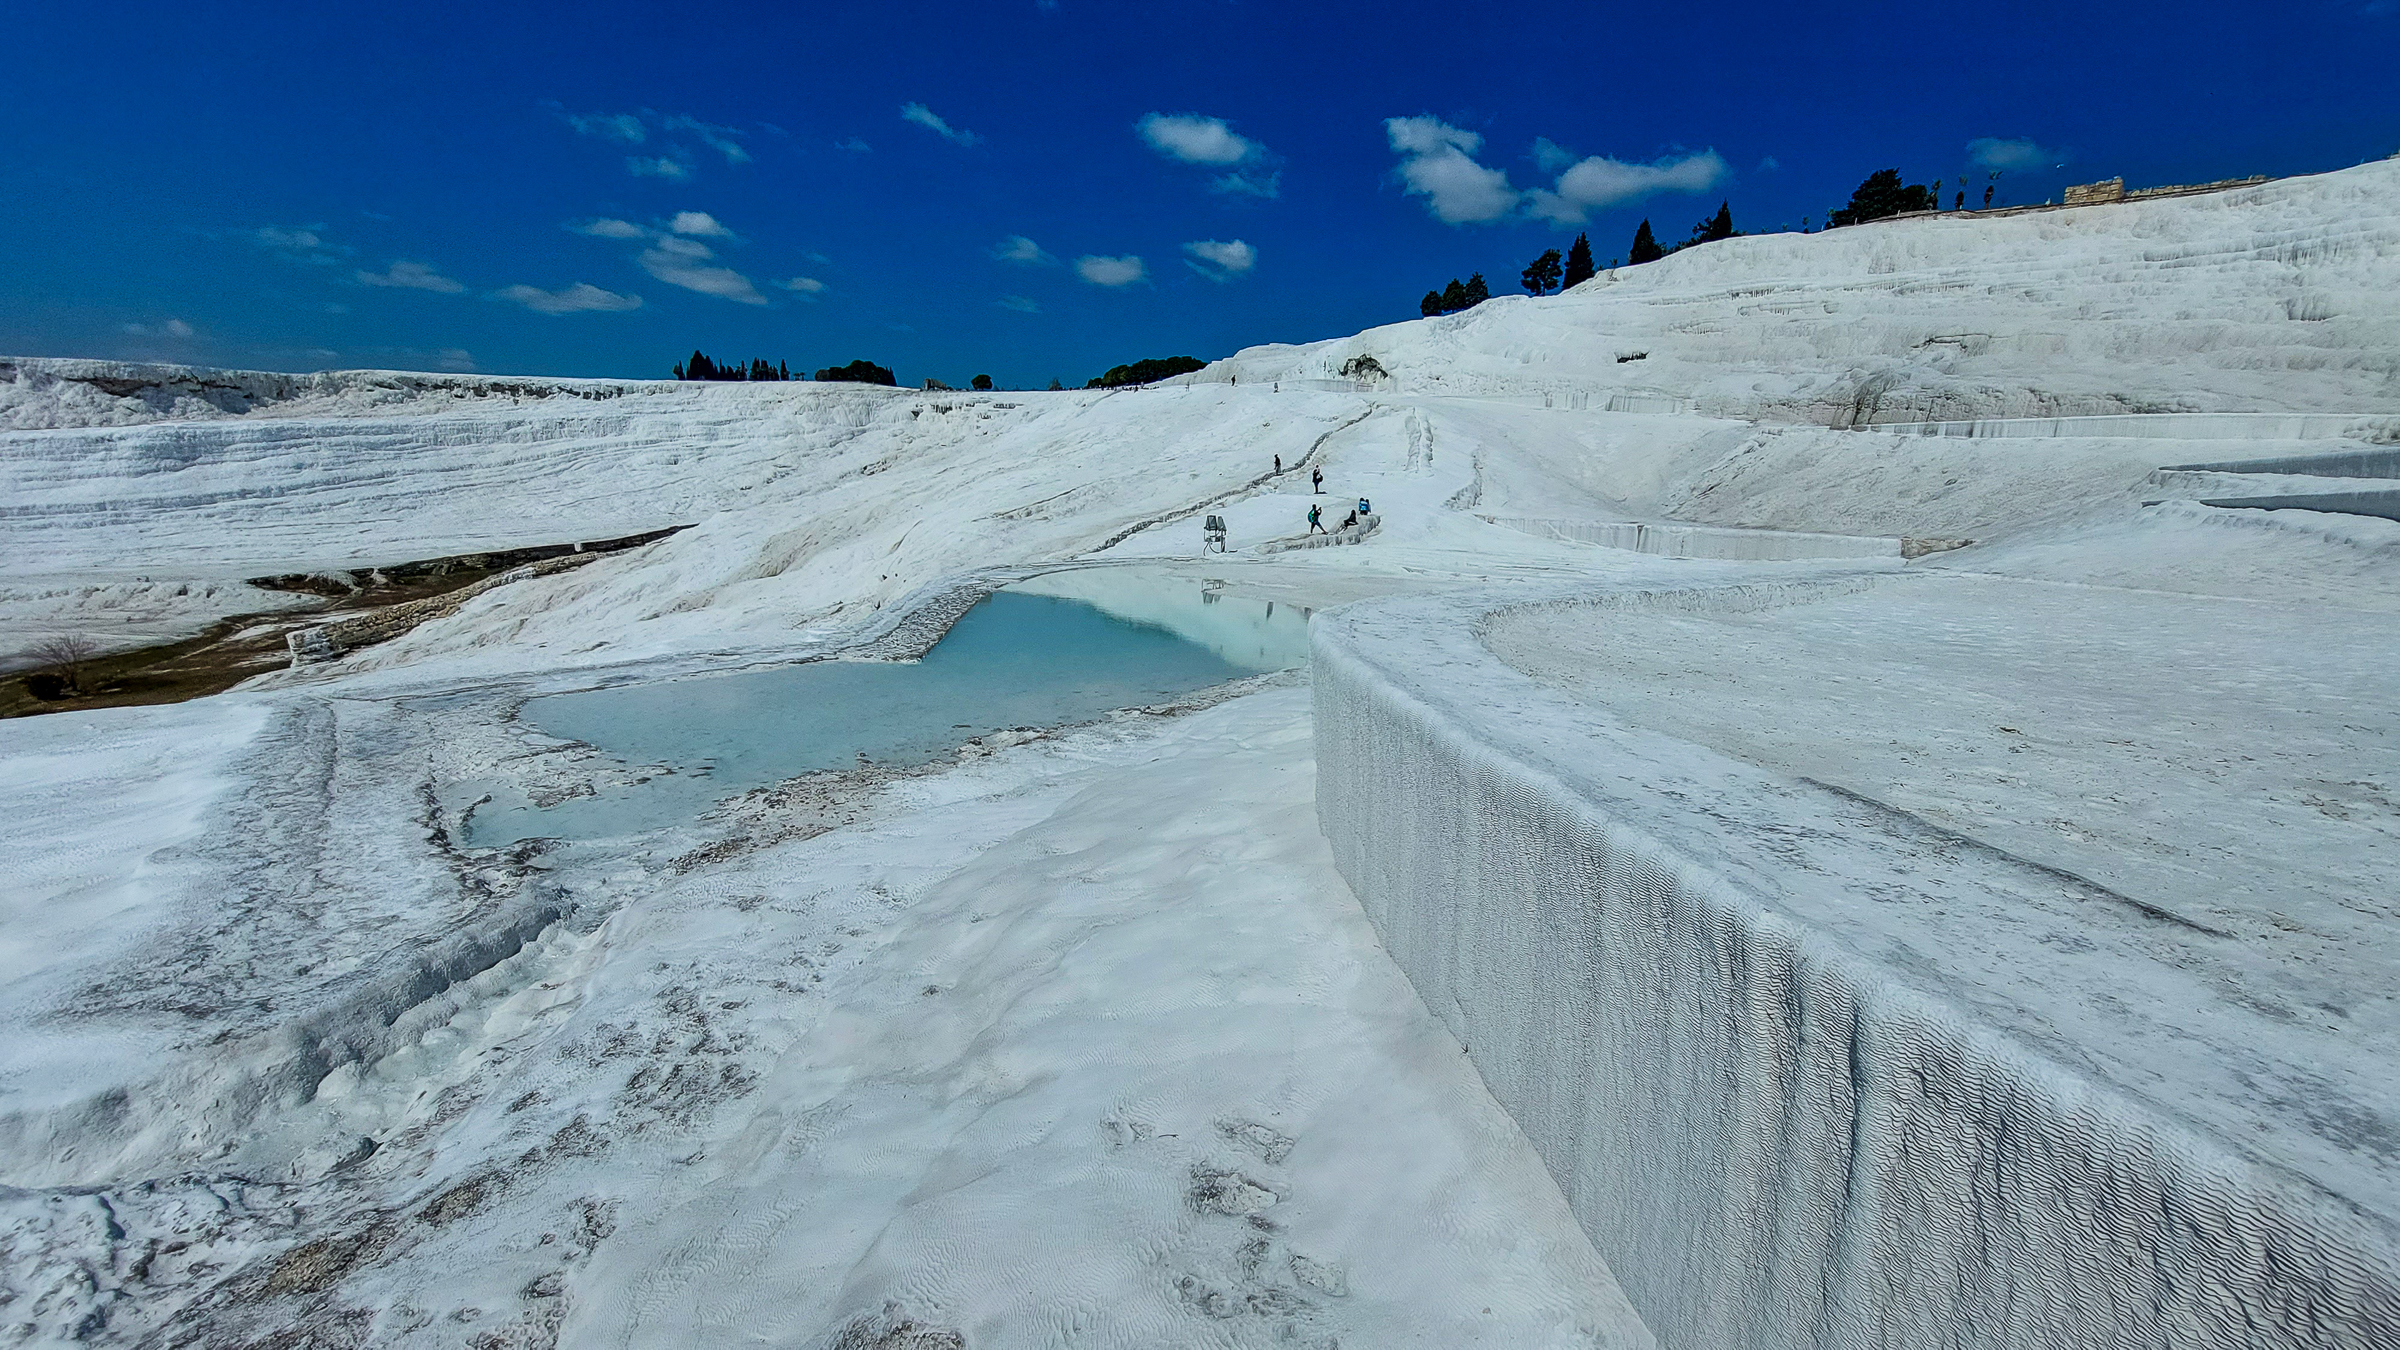 <span  class="uc_style_uc_tiles_grid_image_elementor_uc_items_attribute_title" style="color:#FFFFFF;">Pamukkale: carbonate mineral from thermal springs transforms the region (looks like a snow field)</span>